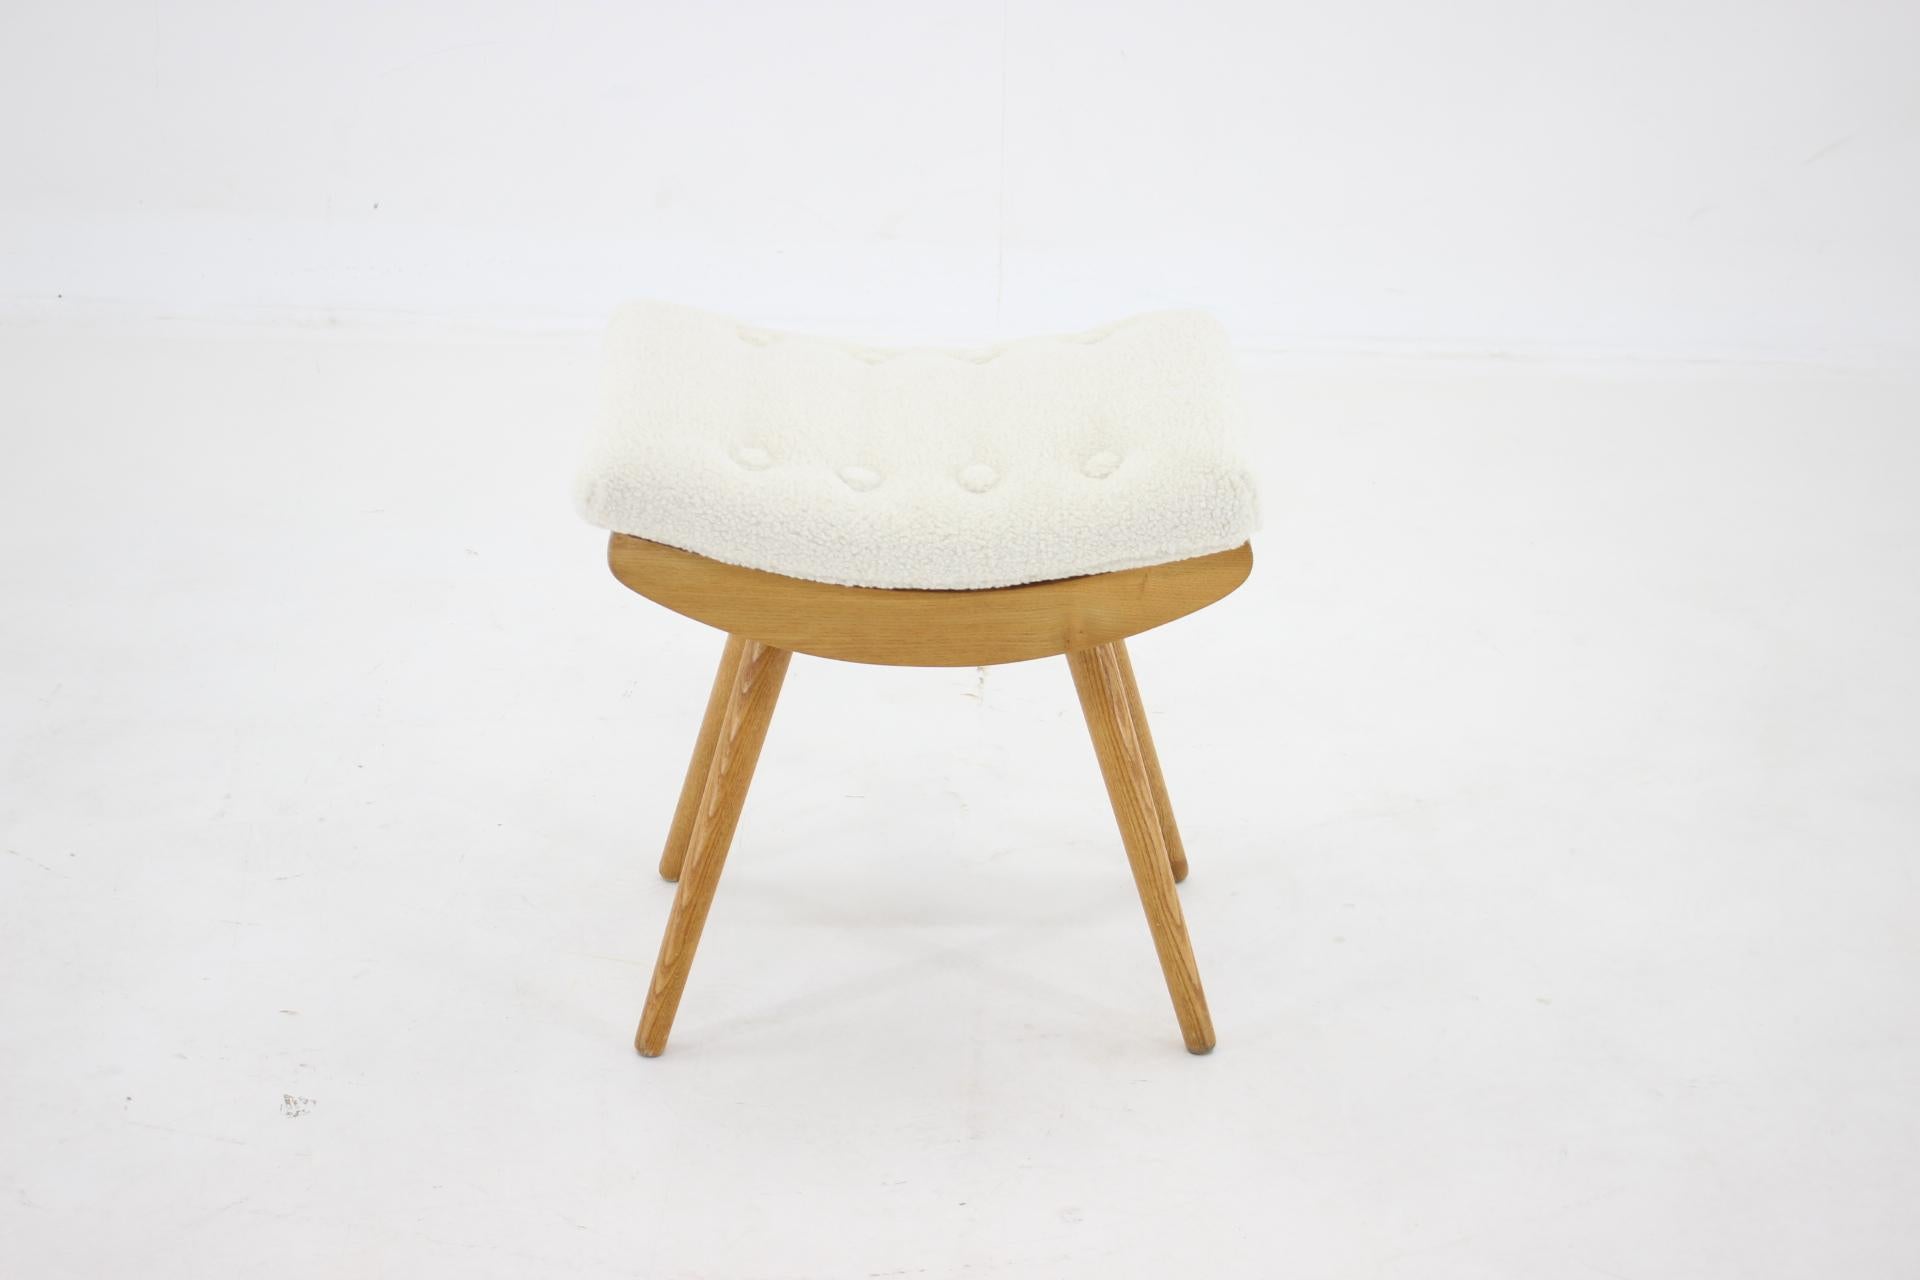 - newly upholstered 
- quality imitation of sheepskin fabric made of synthetic fiber
- wooden parts in very good condition.